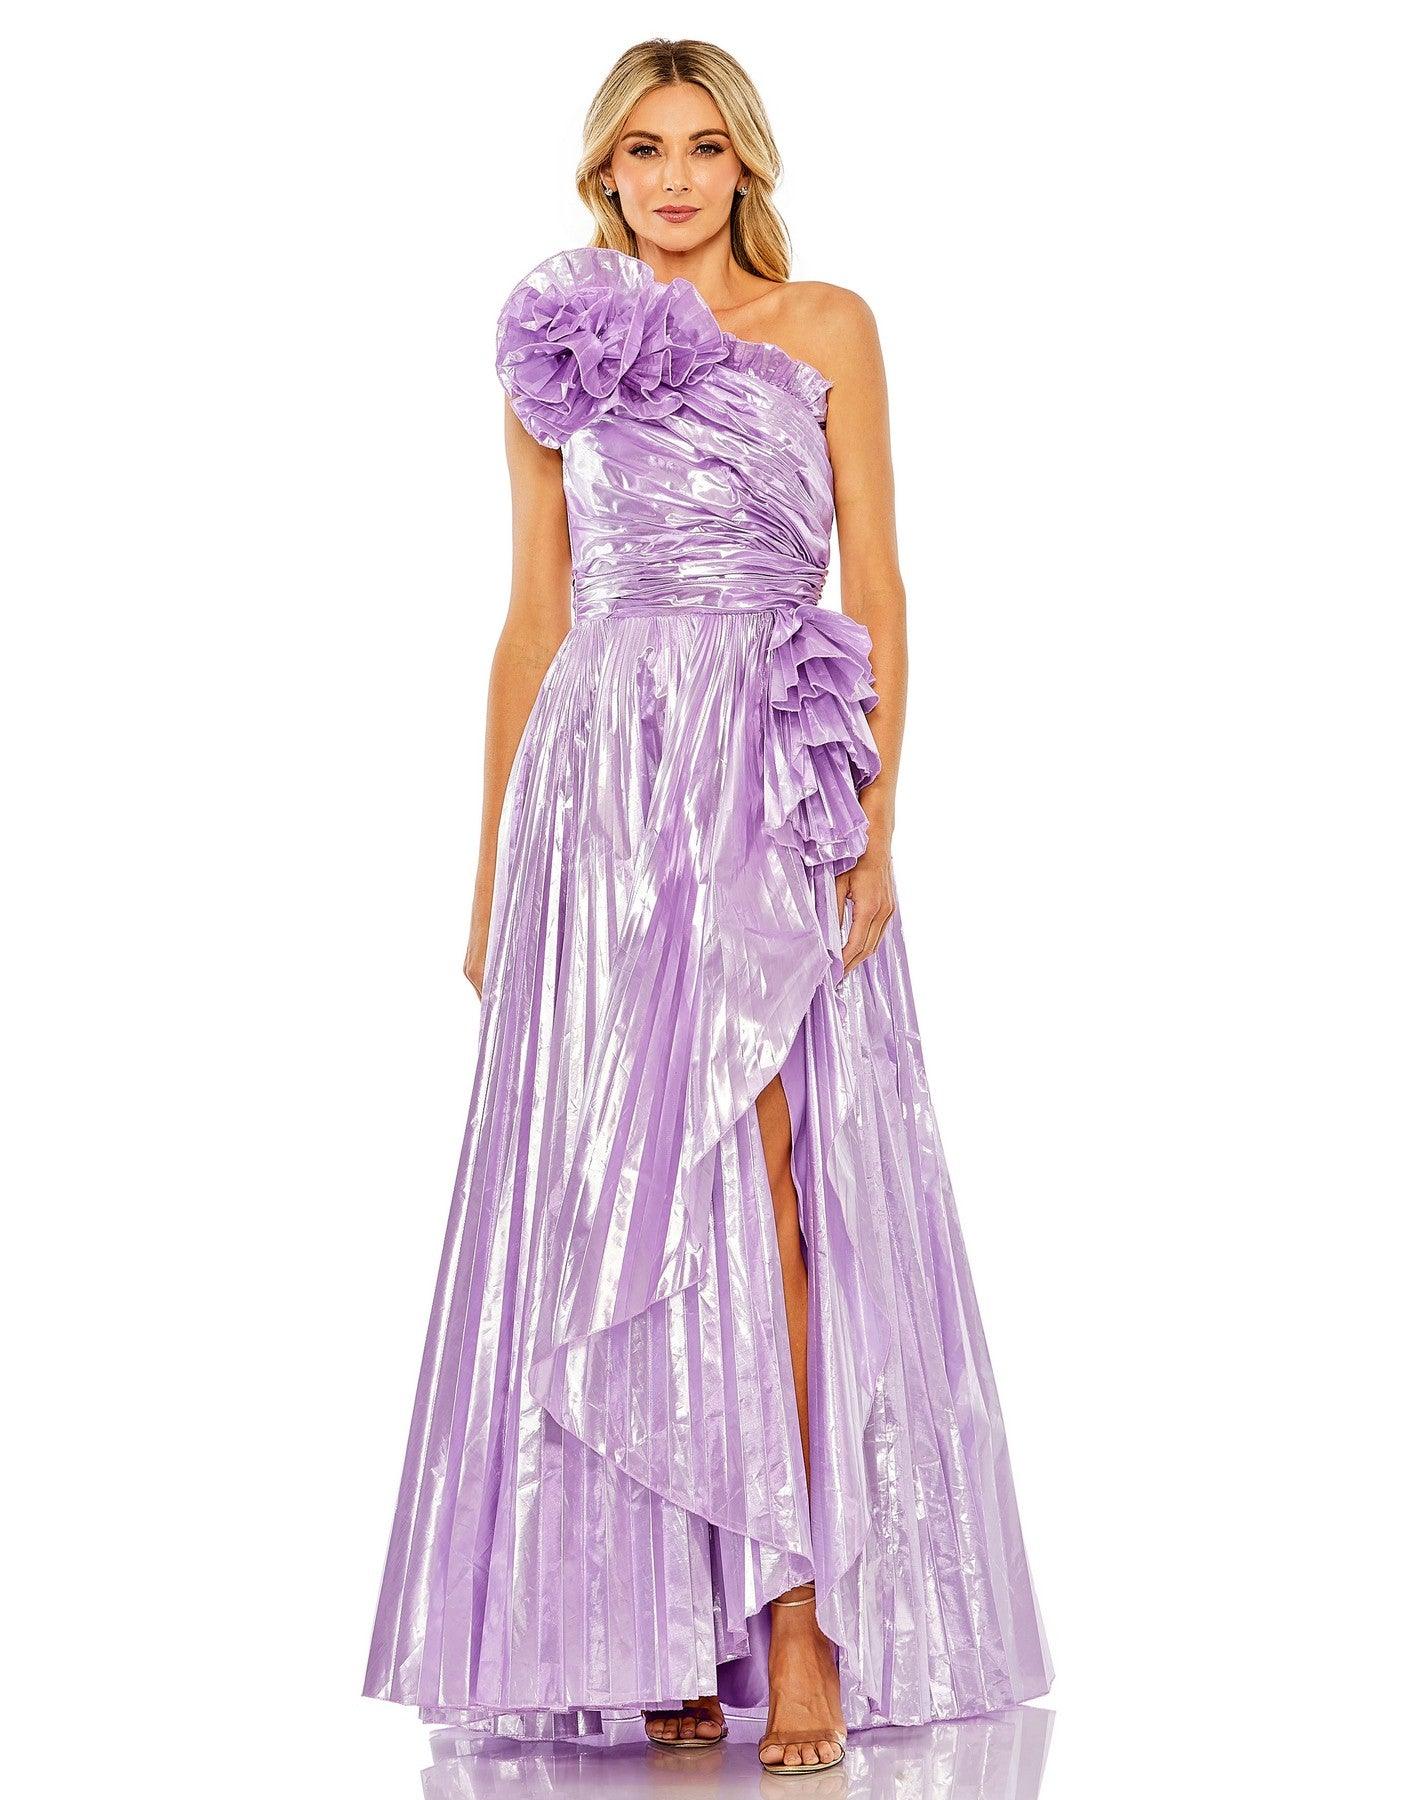 Prom Dresses Prom One Shoulder Long Gown Lilac